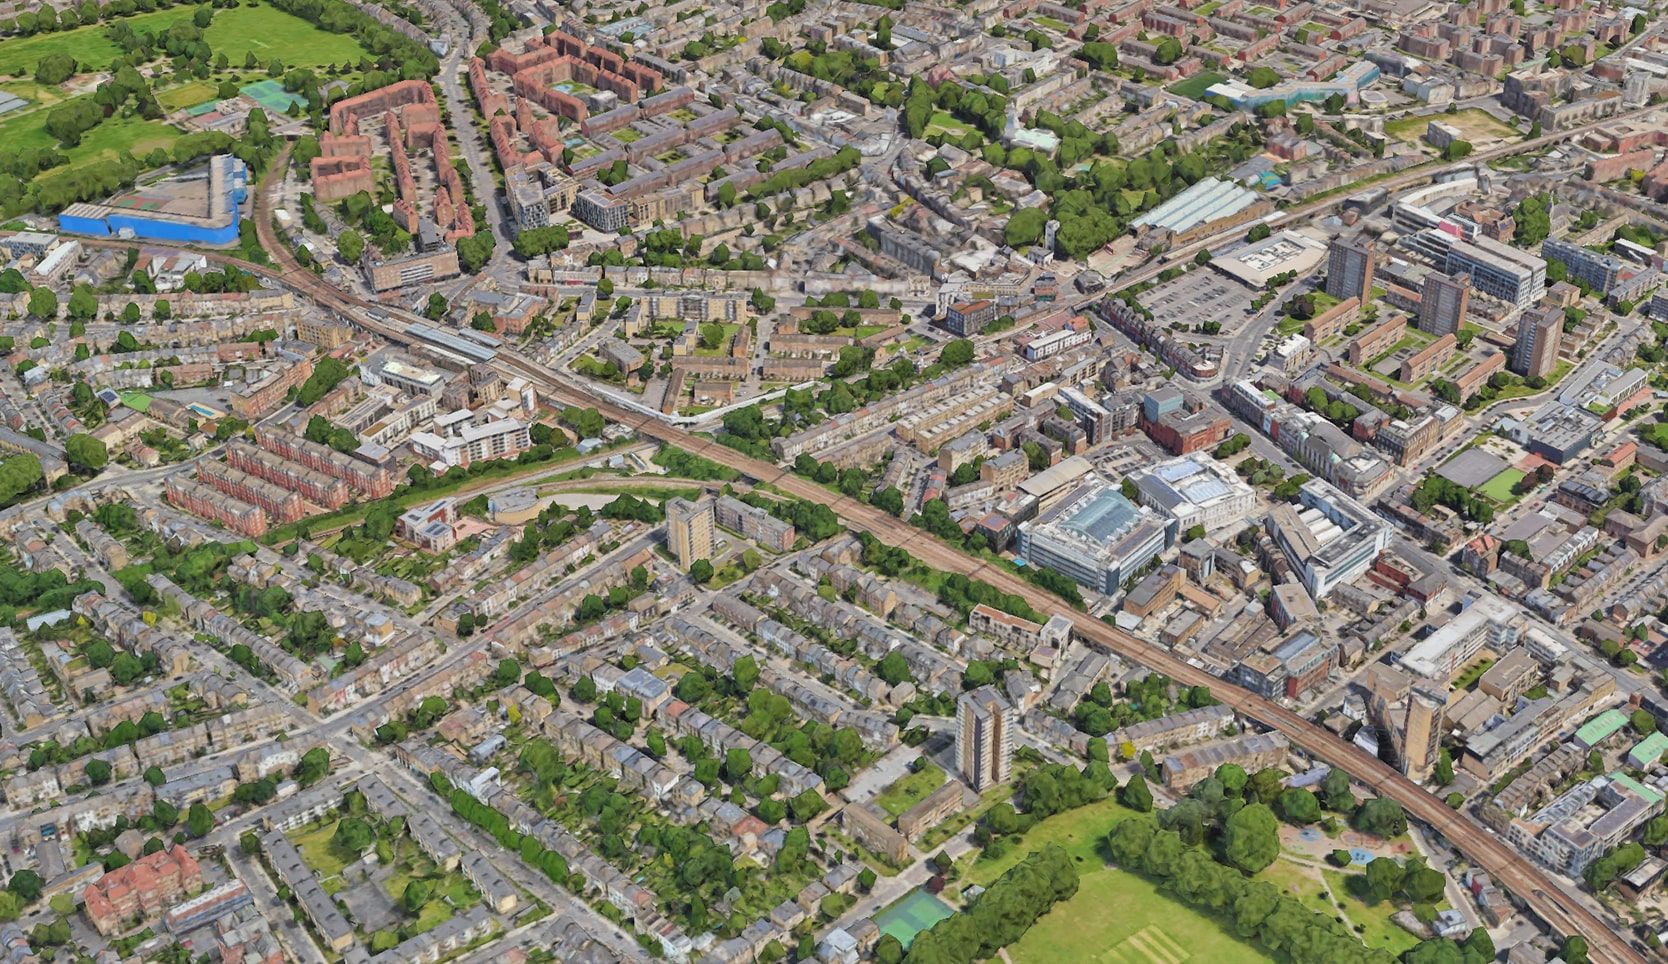 Image from the sky of Hackney council area (Image: Google earth)